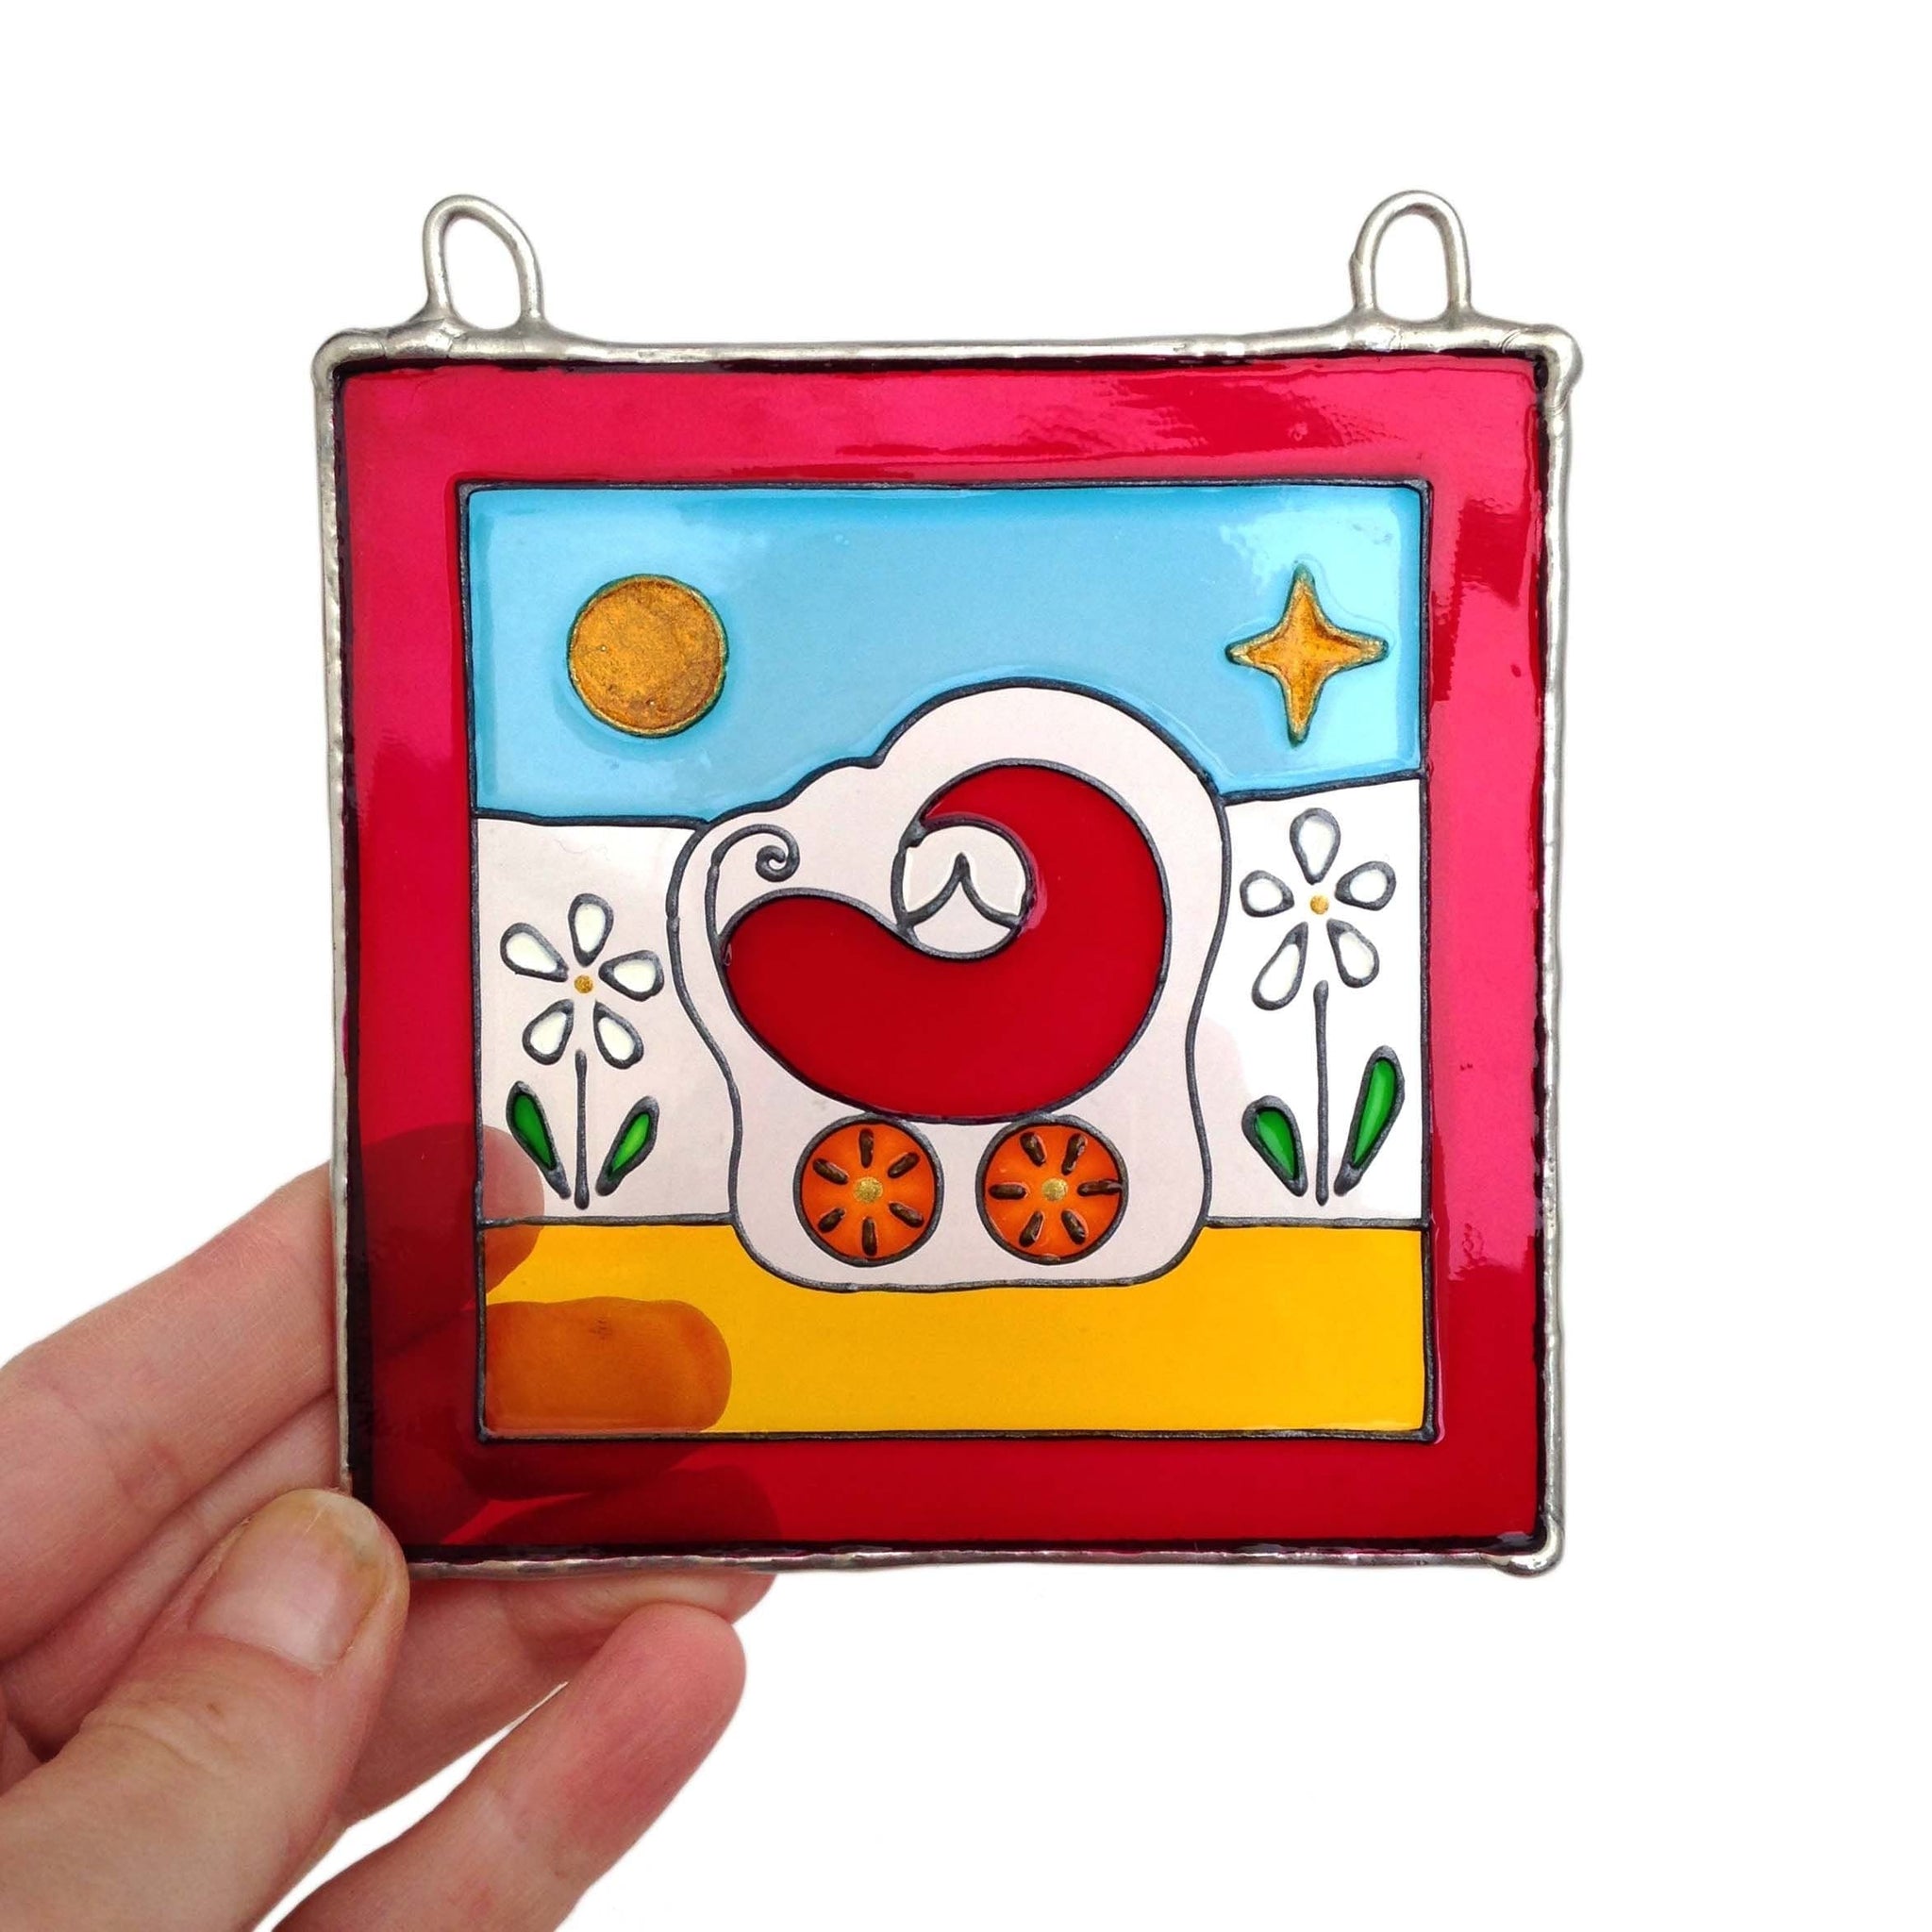 LeKoky girl's version of the hand-painted glass suncatcher featuring a baby in a pram design, being held by a person to show its size - perfect as a Christening or New Born welcoming gift